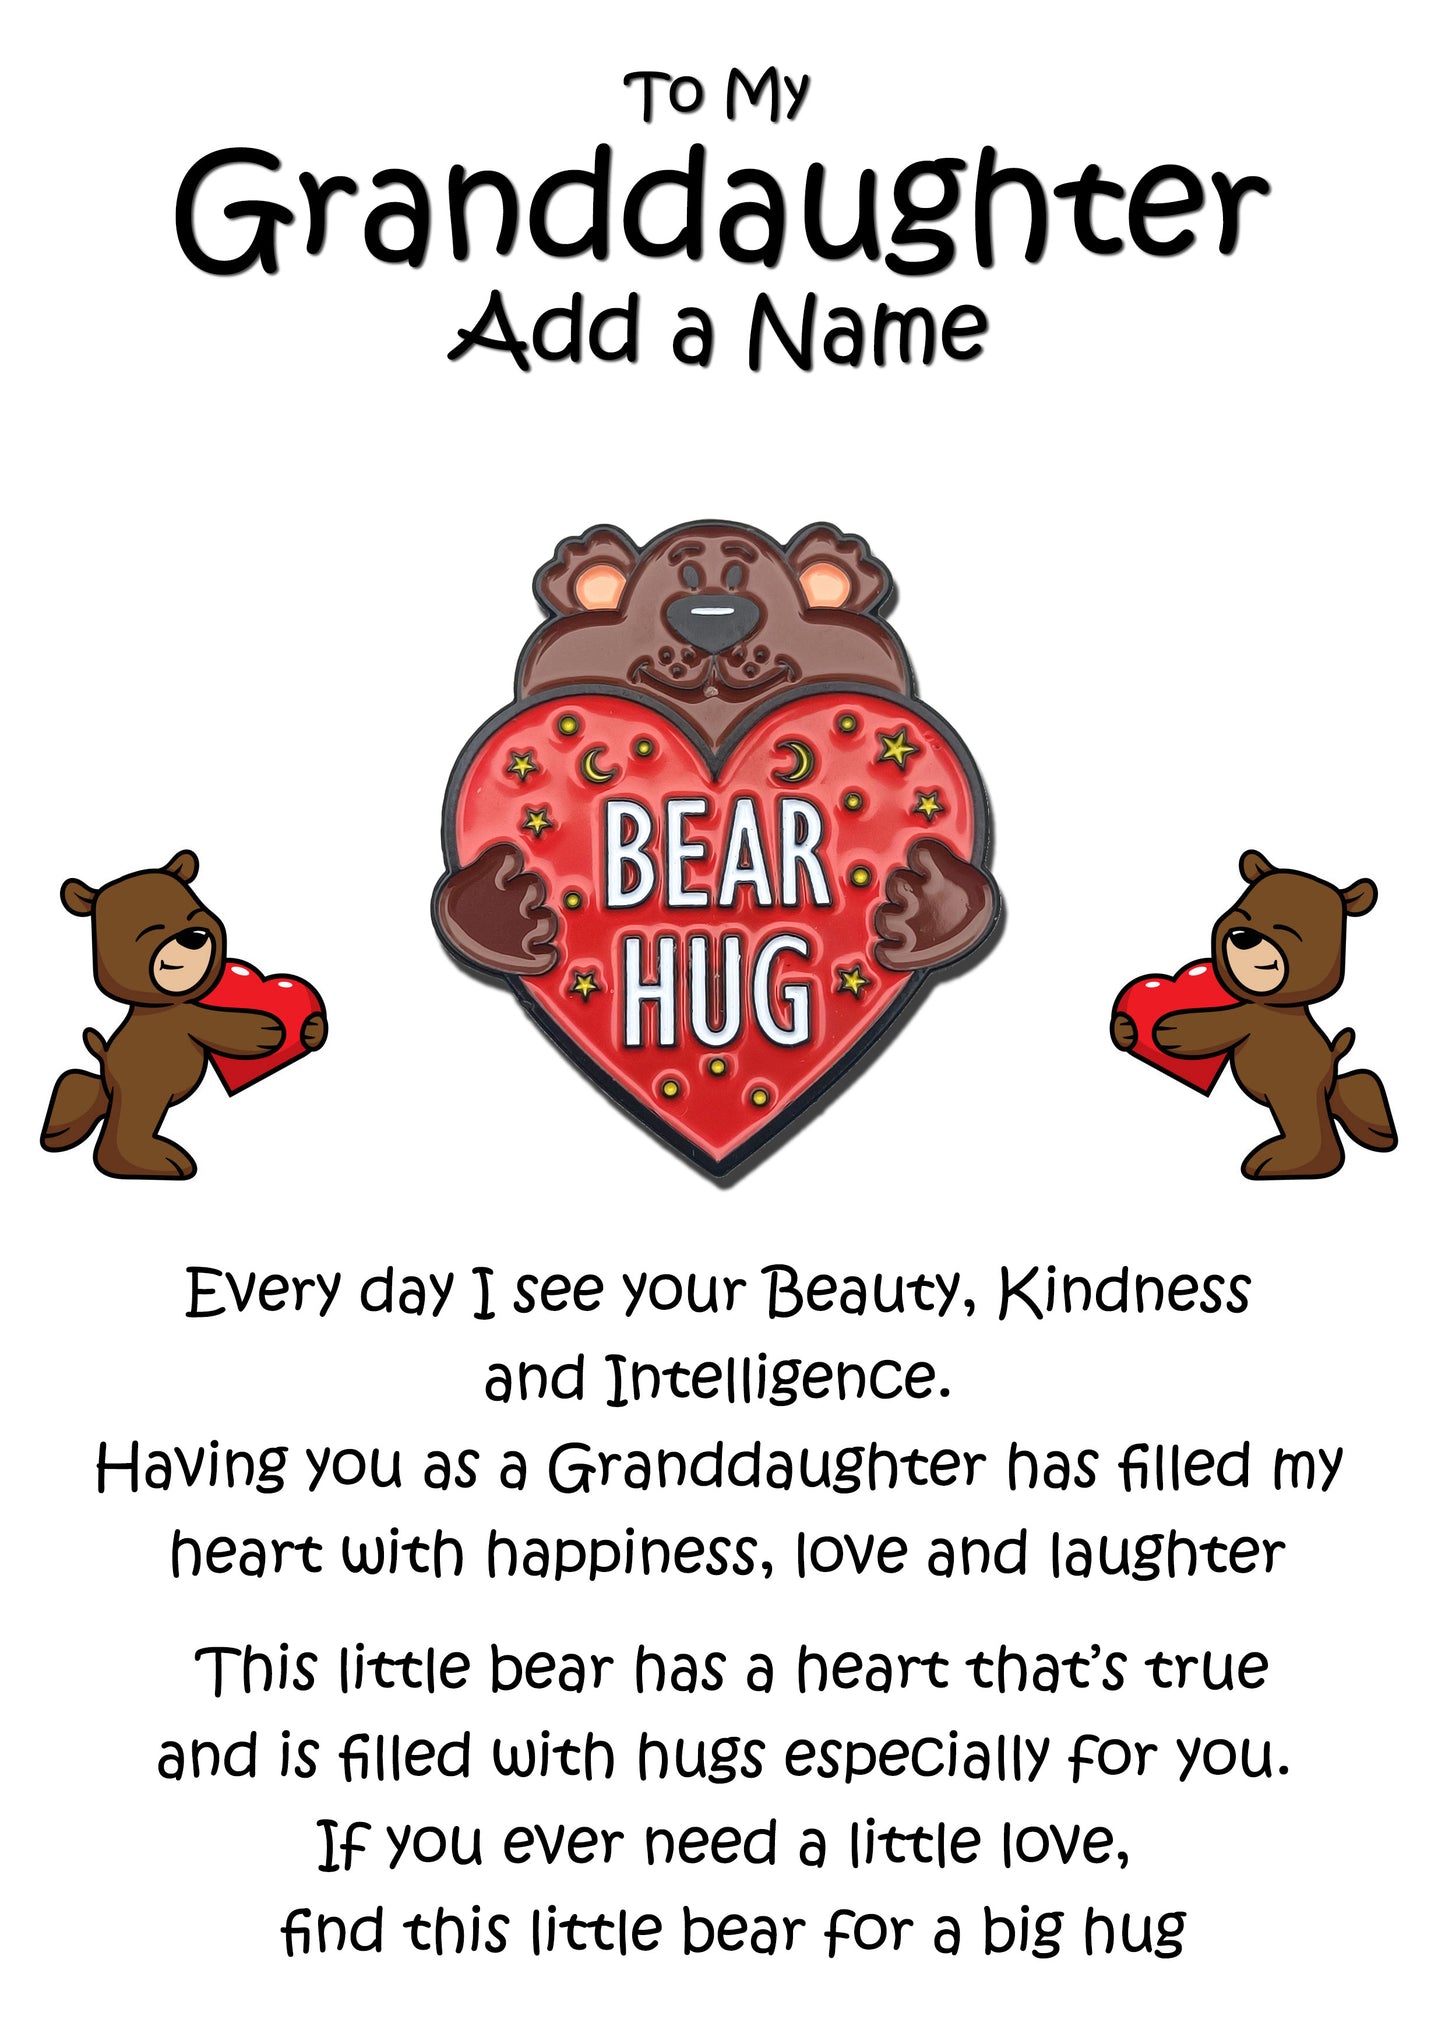 Bear Hug Red Heart Pin Badges & Personalised Granddaughter Message Cards